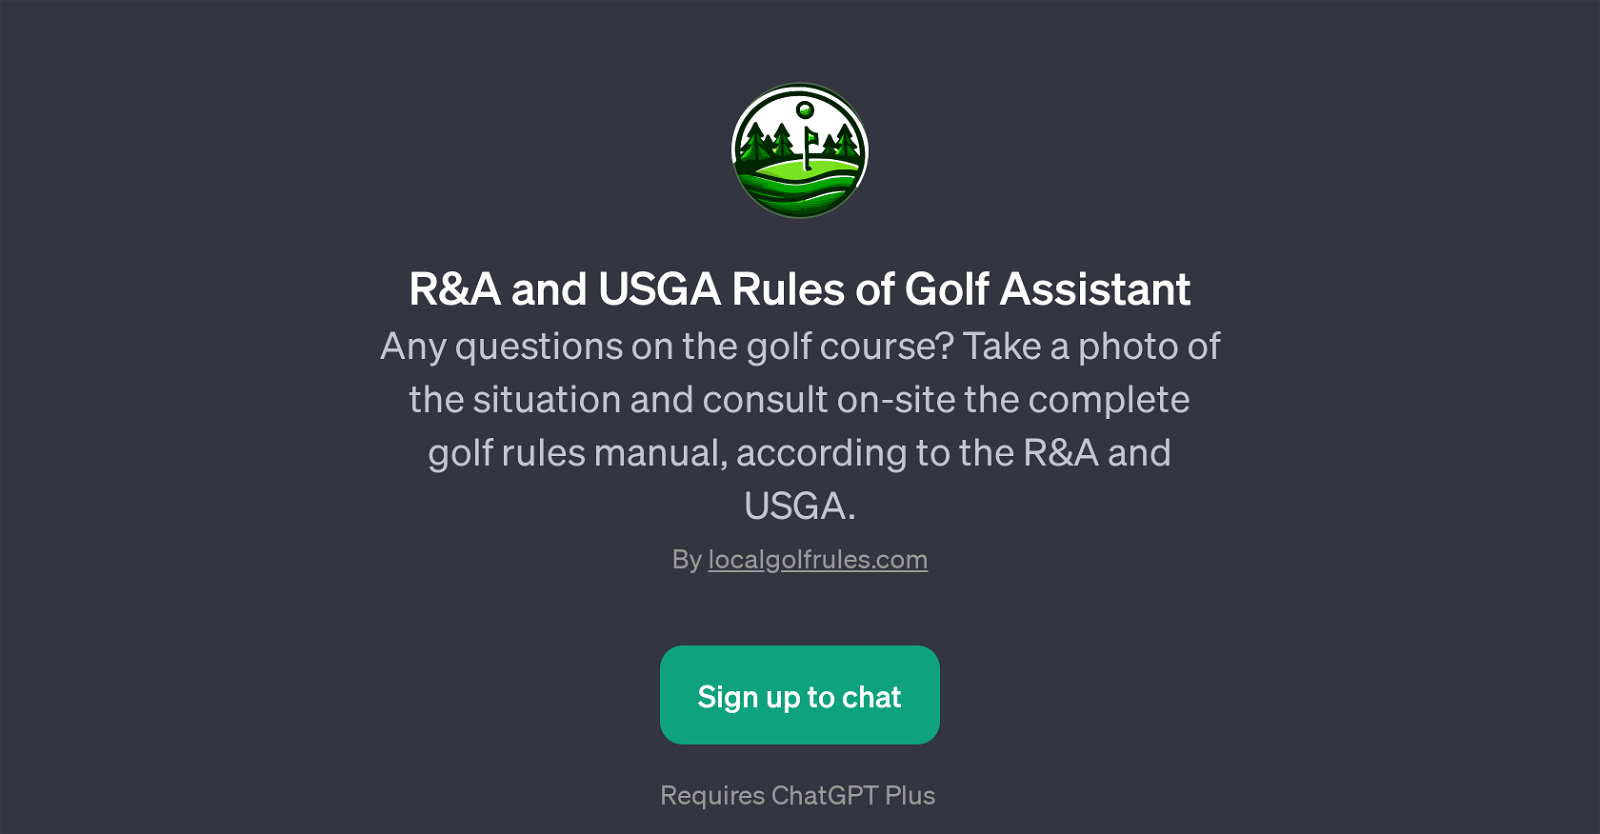 R&A and USGA Rules of Golf Assistant website